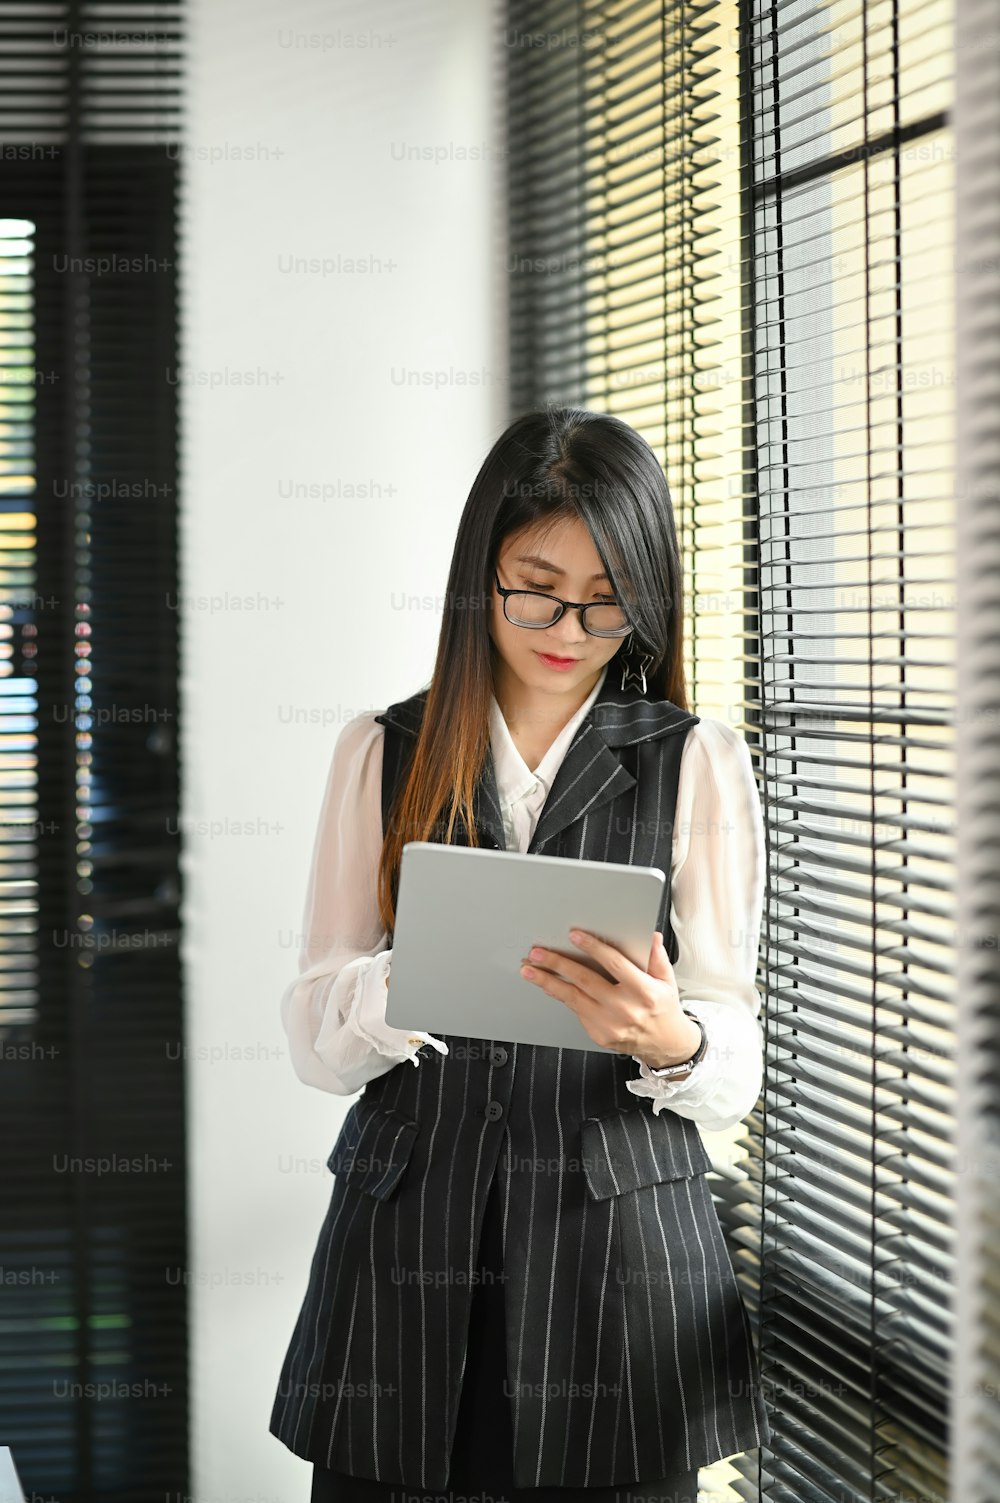 Casual businesswoman with stylus pen writing on digital tablet while standing in modern office.